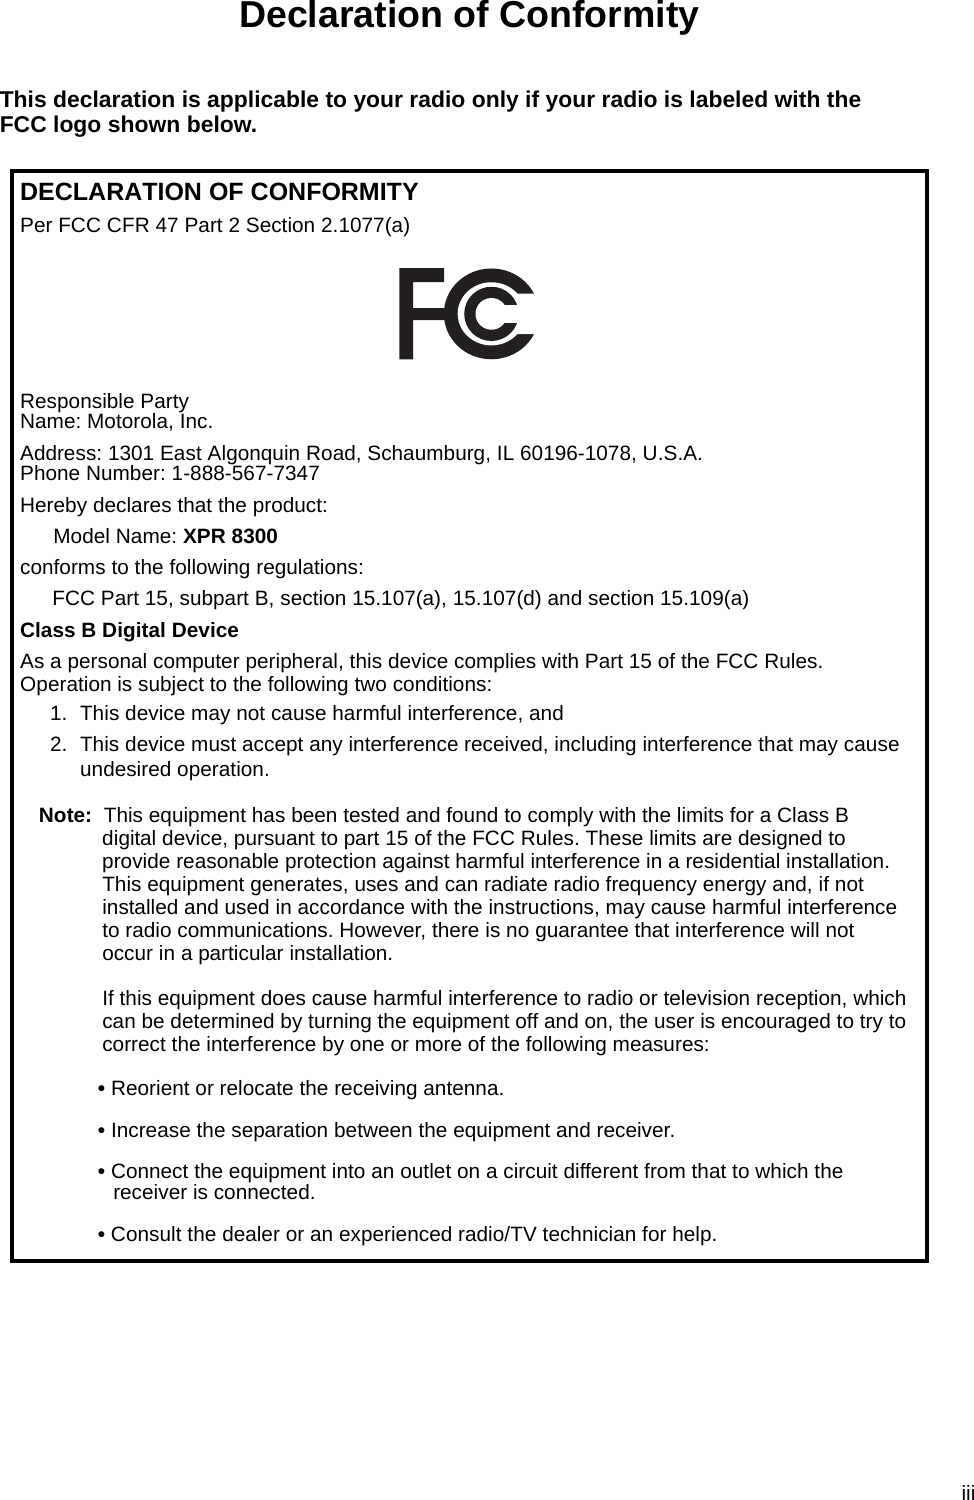 iiiDeclaration of ConformityThis declaration is applicable to your radio only if your radio is labeled with the FCC logo shown below.DECLARATION OF CONFORMITYPer FCC CFR 47 Part 2 Section 2.1077(a)Responsible Party Name: Motorola, Inc.Address: 1301 East Algonquin Road, Schaumburg, IL 60196-1078, U.S.A.Phone Number: 1-888-567-7347Hereby declares that the product:Model Name: XPR 8300conforms to the following regulations:FCC Part 15, subpart B, section 15.107(a), 15.107(d) and section 15.109(a)Class B Digital DeviceAs a personal computer peripheral, this device complies with Part 15 of the FCC Rules. Operation is subject to the following two conditions:1. This device may not cause harmful interference, and 2. This device must accept any interference received, including interference that may cause undesired operation.Note: This equipment has been tested and found to comply with the limits for a Class B digital device, pursuant to part 15 of the FCC Rules. These limits are designed to provide reasonable protection against harmful interference in a residential installation. This equipment generates, uses and can radiate radio frequency energy and, if not installed and used in accordance with the instructions, may cause harmful interference to radio communications. However, there is no guarantee that interference will not occur in a particular installation. If this equipment does cause harmful interference to radio or television reception, which can be determined by turning the equipment off and on, the user is encouraged to try to correct the interference by one or more of the following measures:• Reorient or relocate the receiving antenna.• Increase the separation between the equipment and receiver.• Connect the equipment into an outlet on a circuit different from that to which the receiver is connected. • Consult the dealer or an experienced radio/TV technician for help.